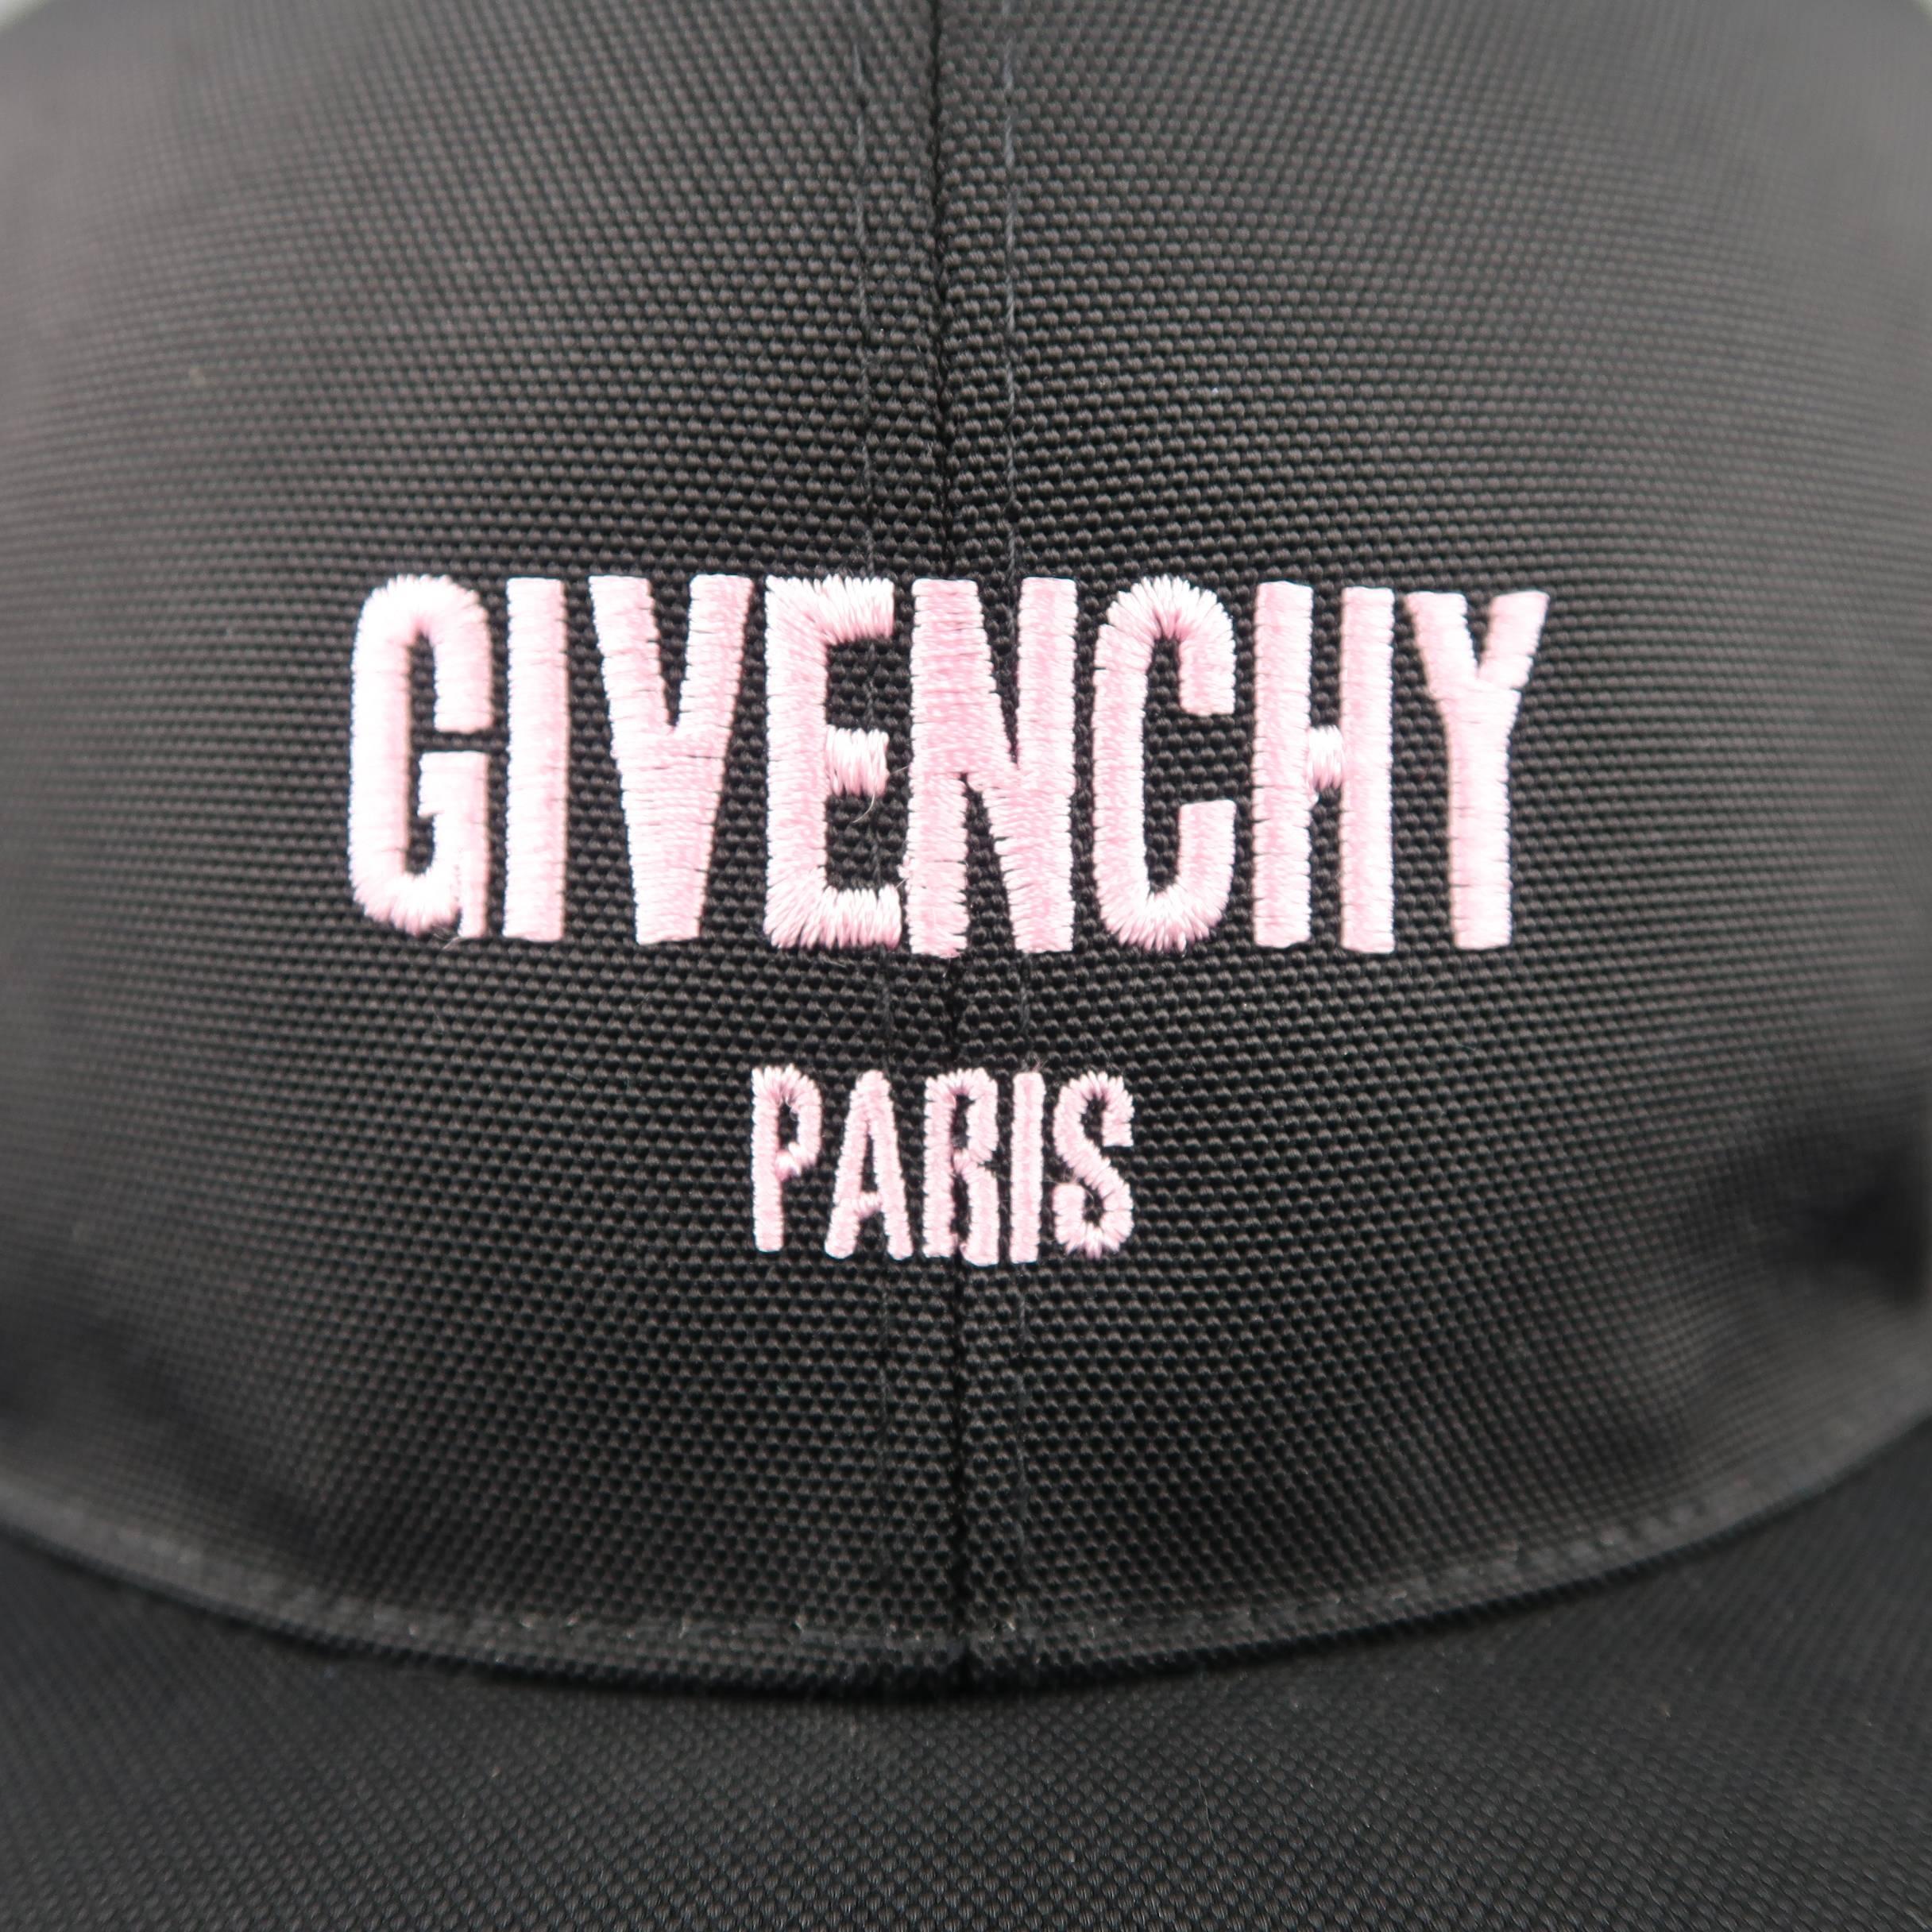 GIVENCHY snap back ball cap comes in black canvas with a pink embroidered logo front and pink and blue floral embroidered back. Adjustable. One size fits all. Made in Italy.
 
Excellent Pre-Owned Condition.
